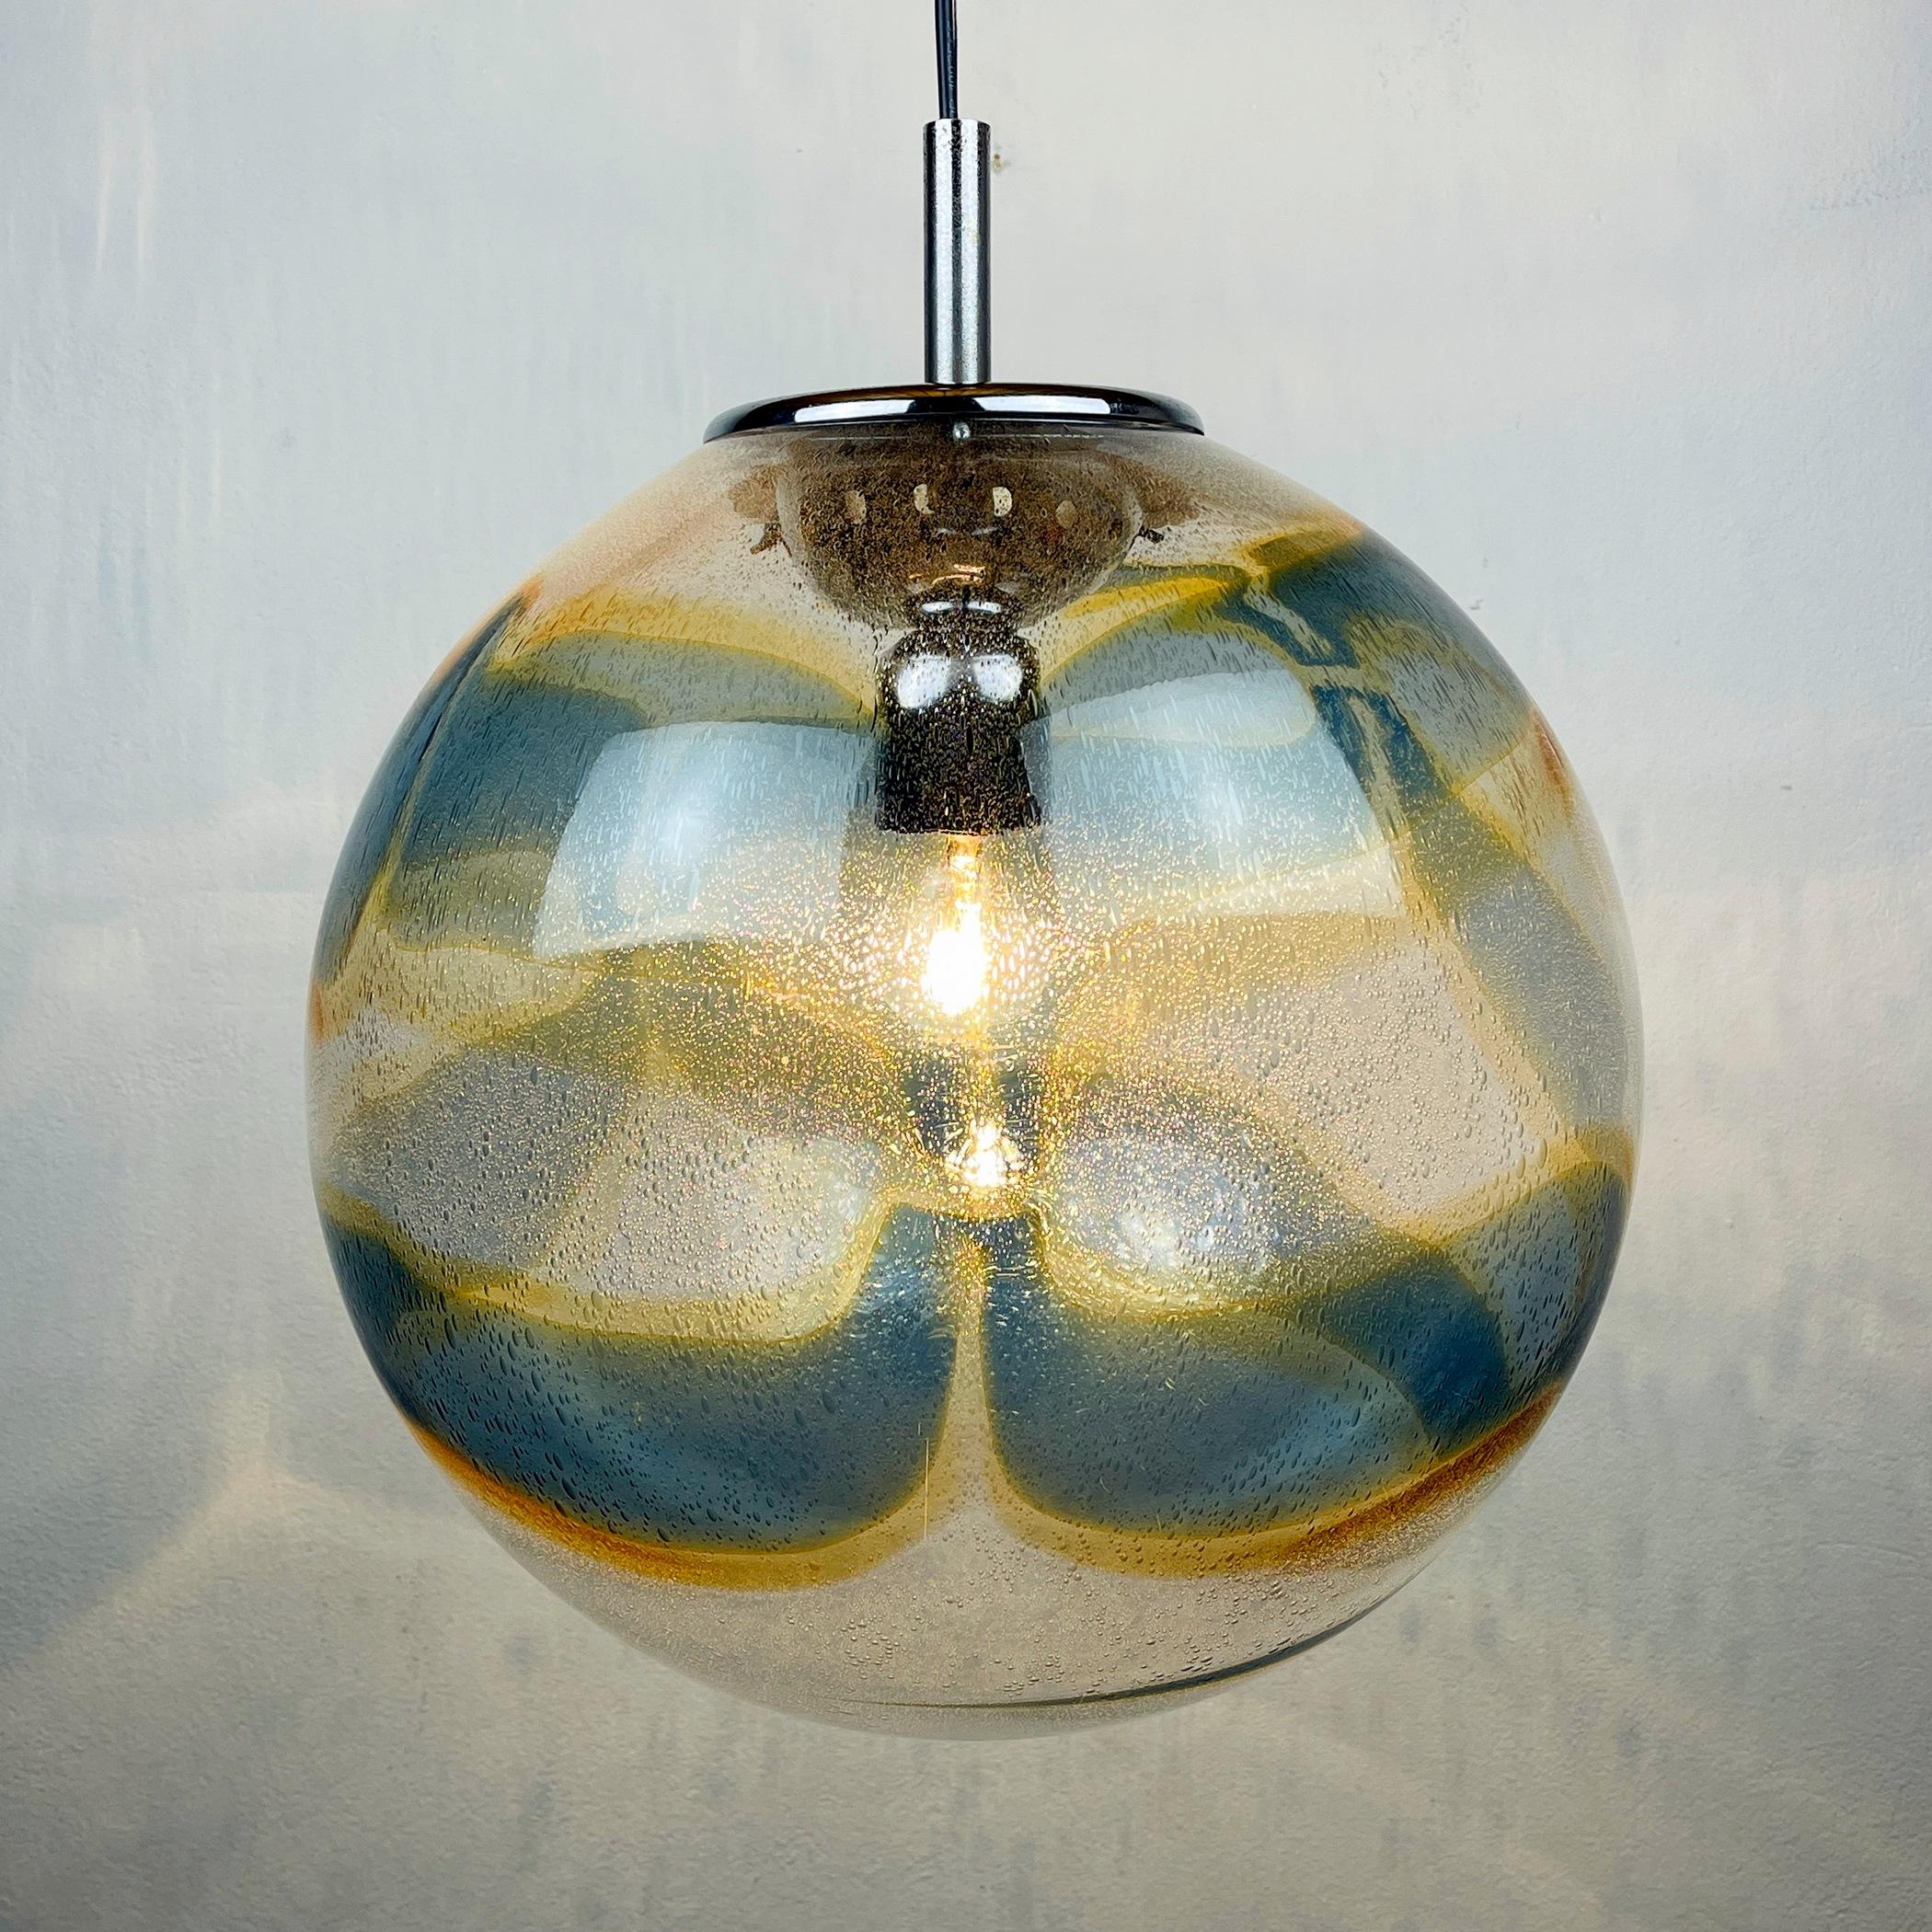 This large, beautiful vintage swirl Murano lamp by Vistosi was made in Italy in the 70s. A transparent glass shade with a 